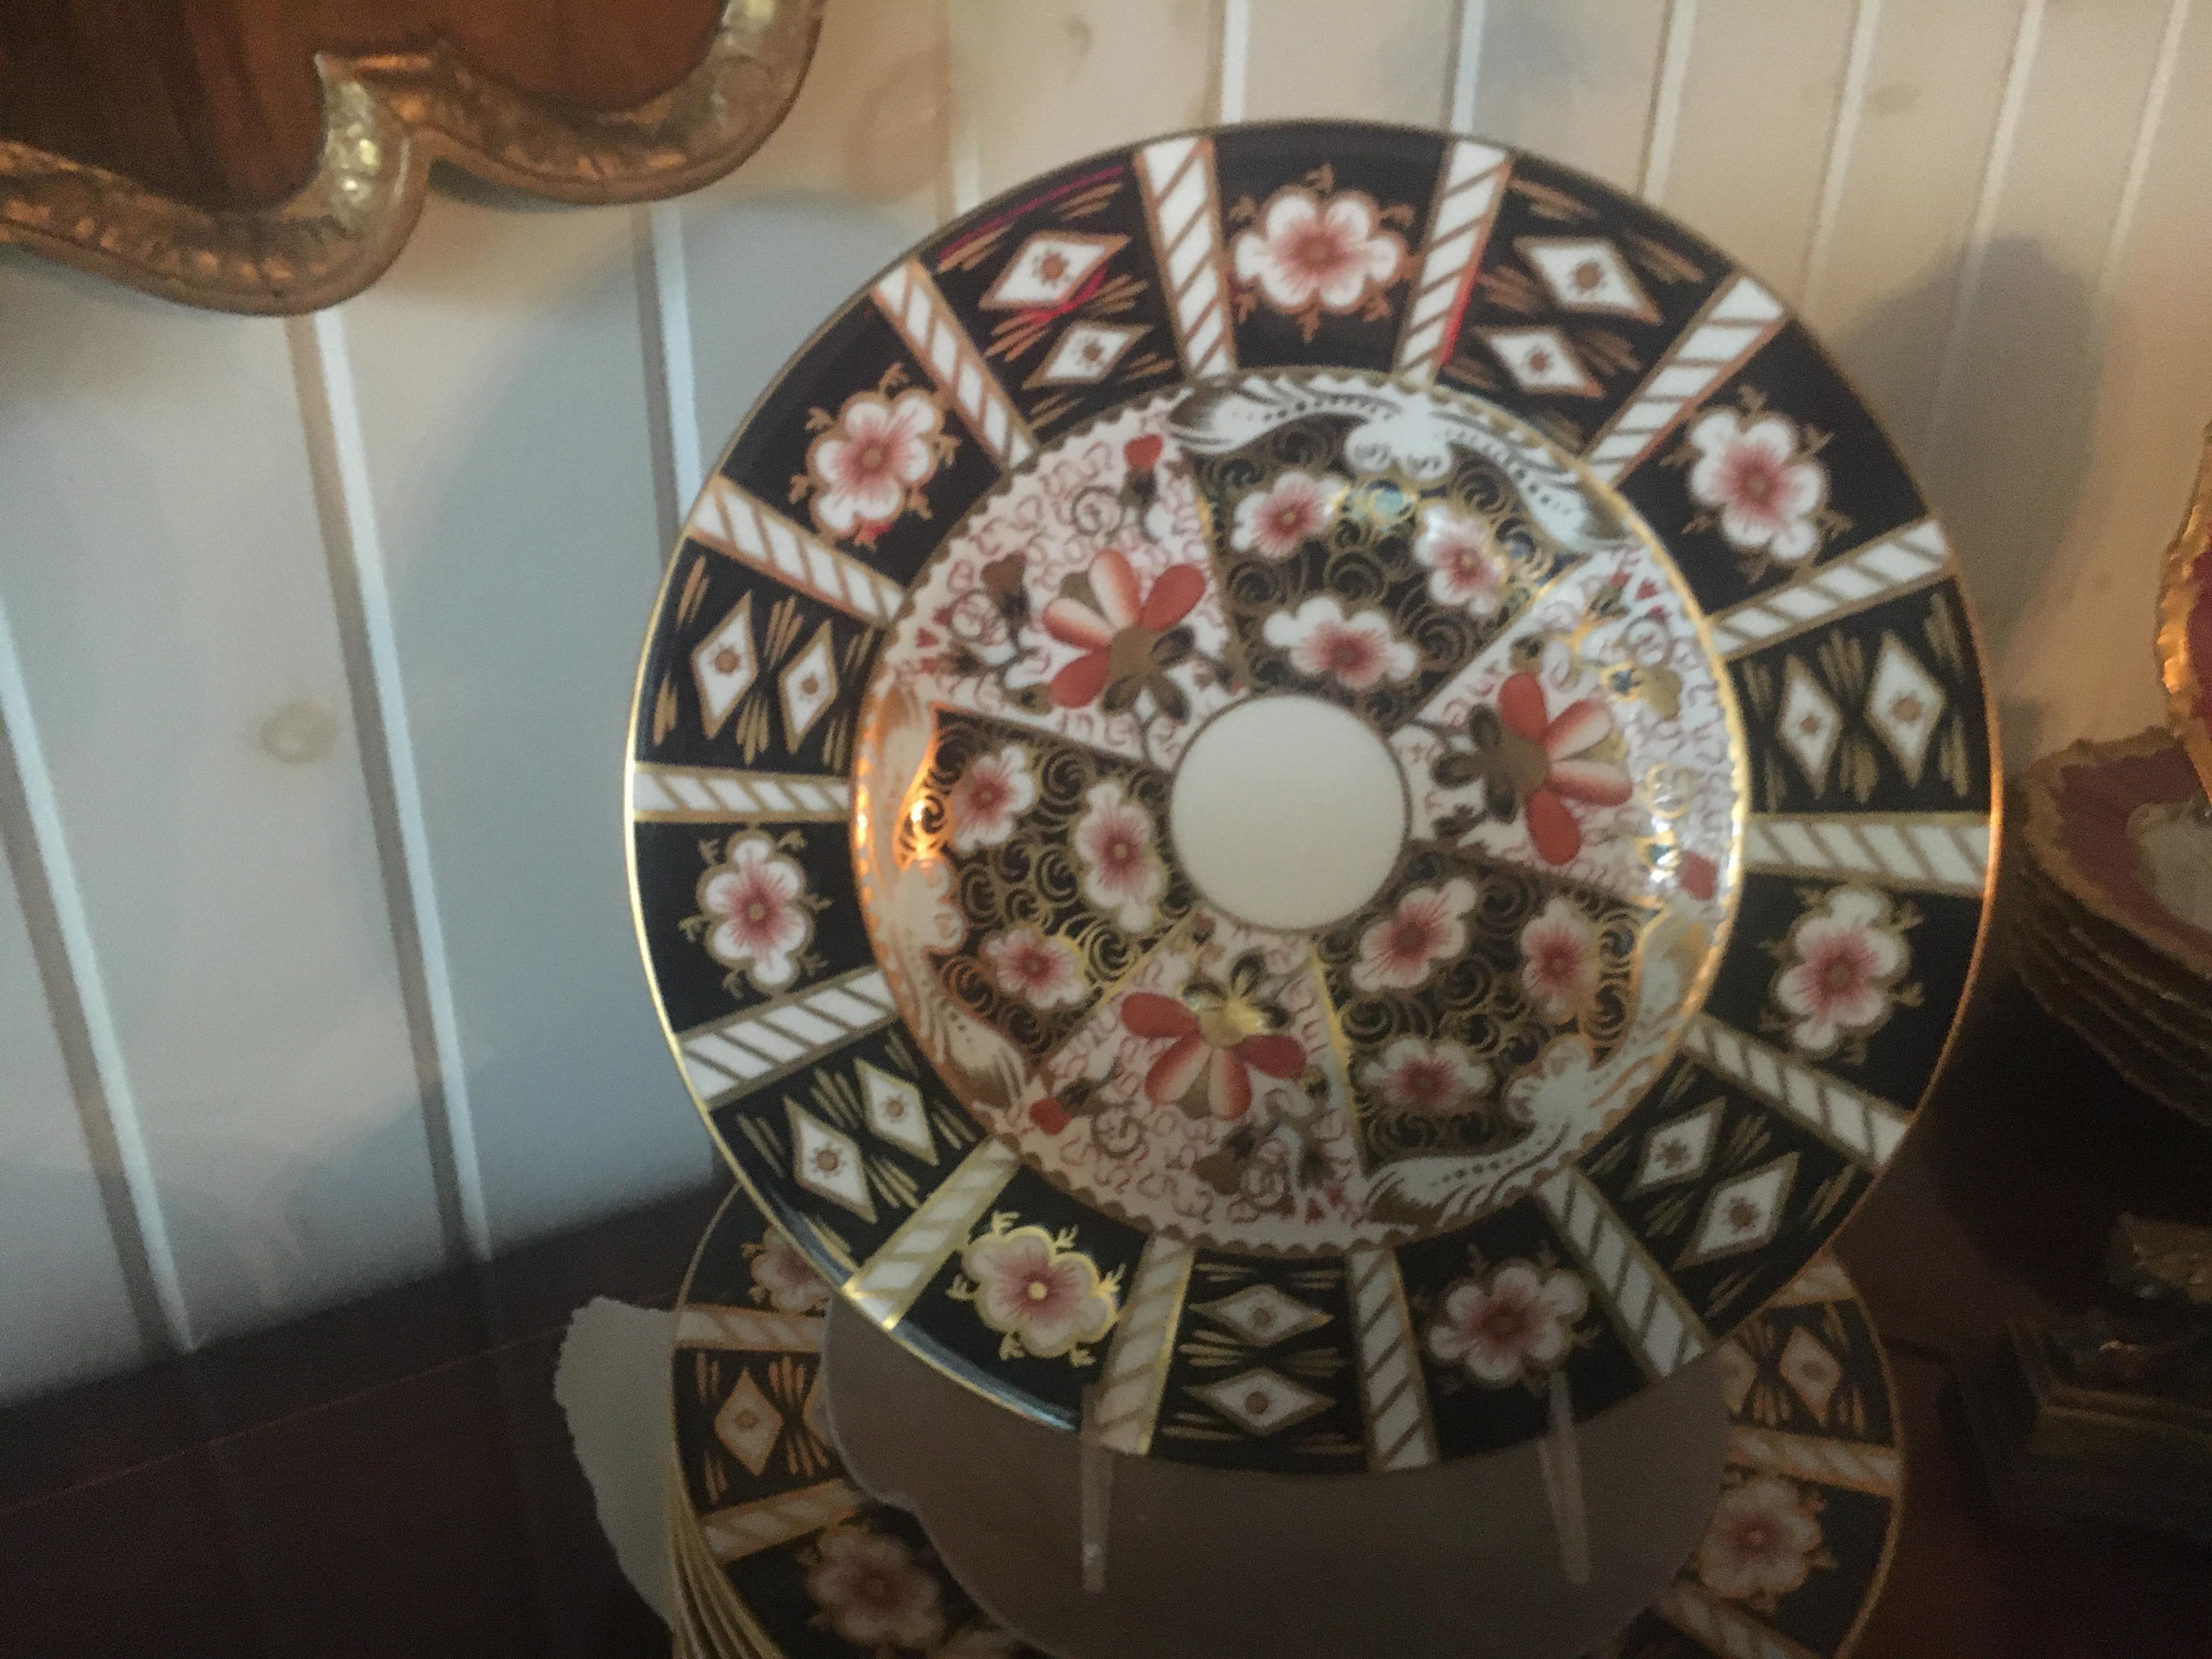 A Royal Crown Derby Partial dinner service in the traditional Imari pattern. Measures: Diameter of dinner plate 10.5